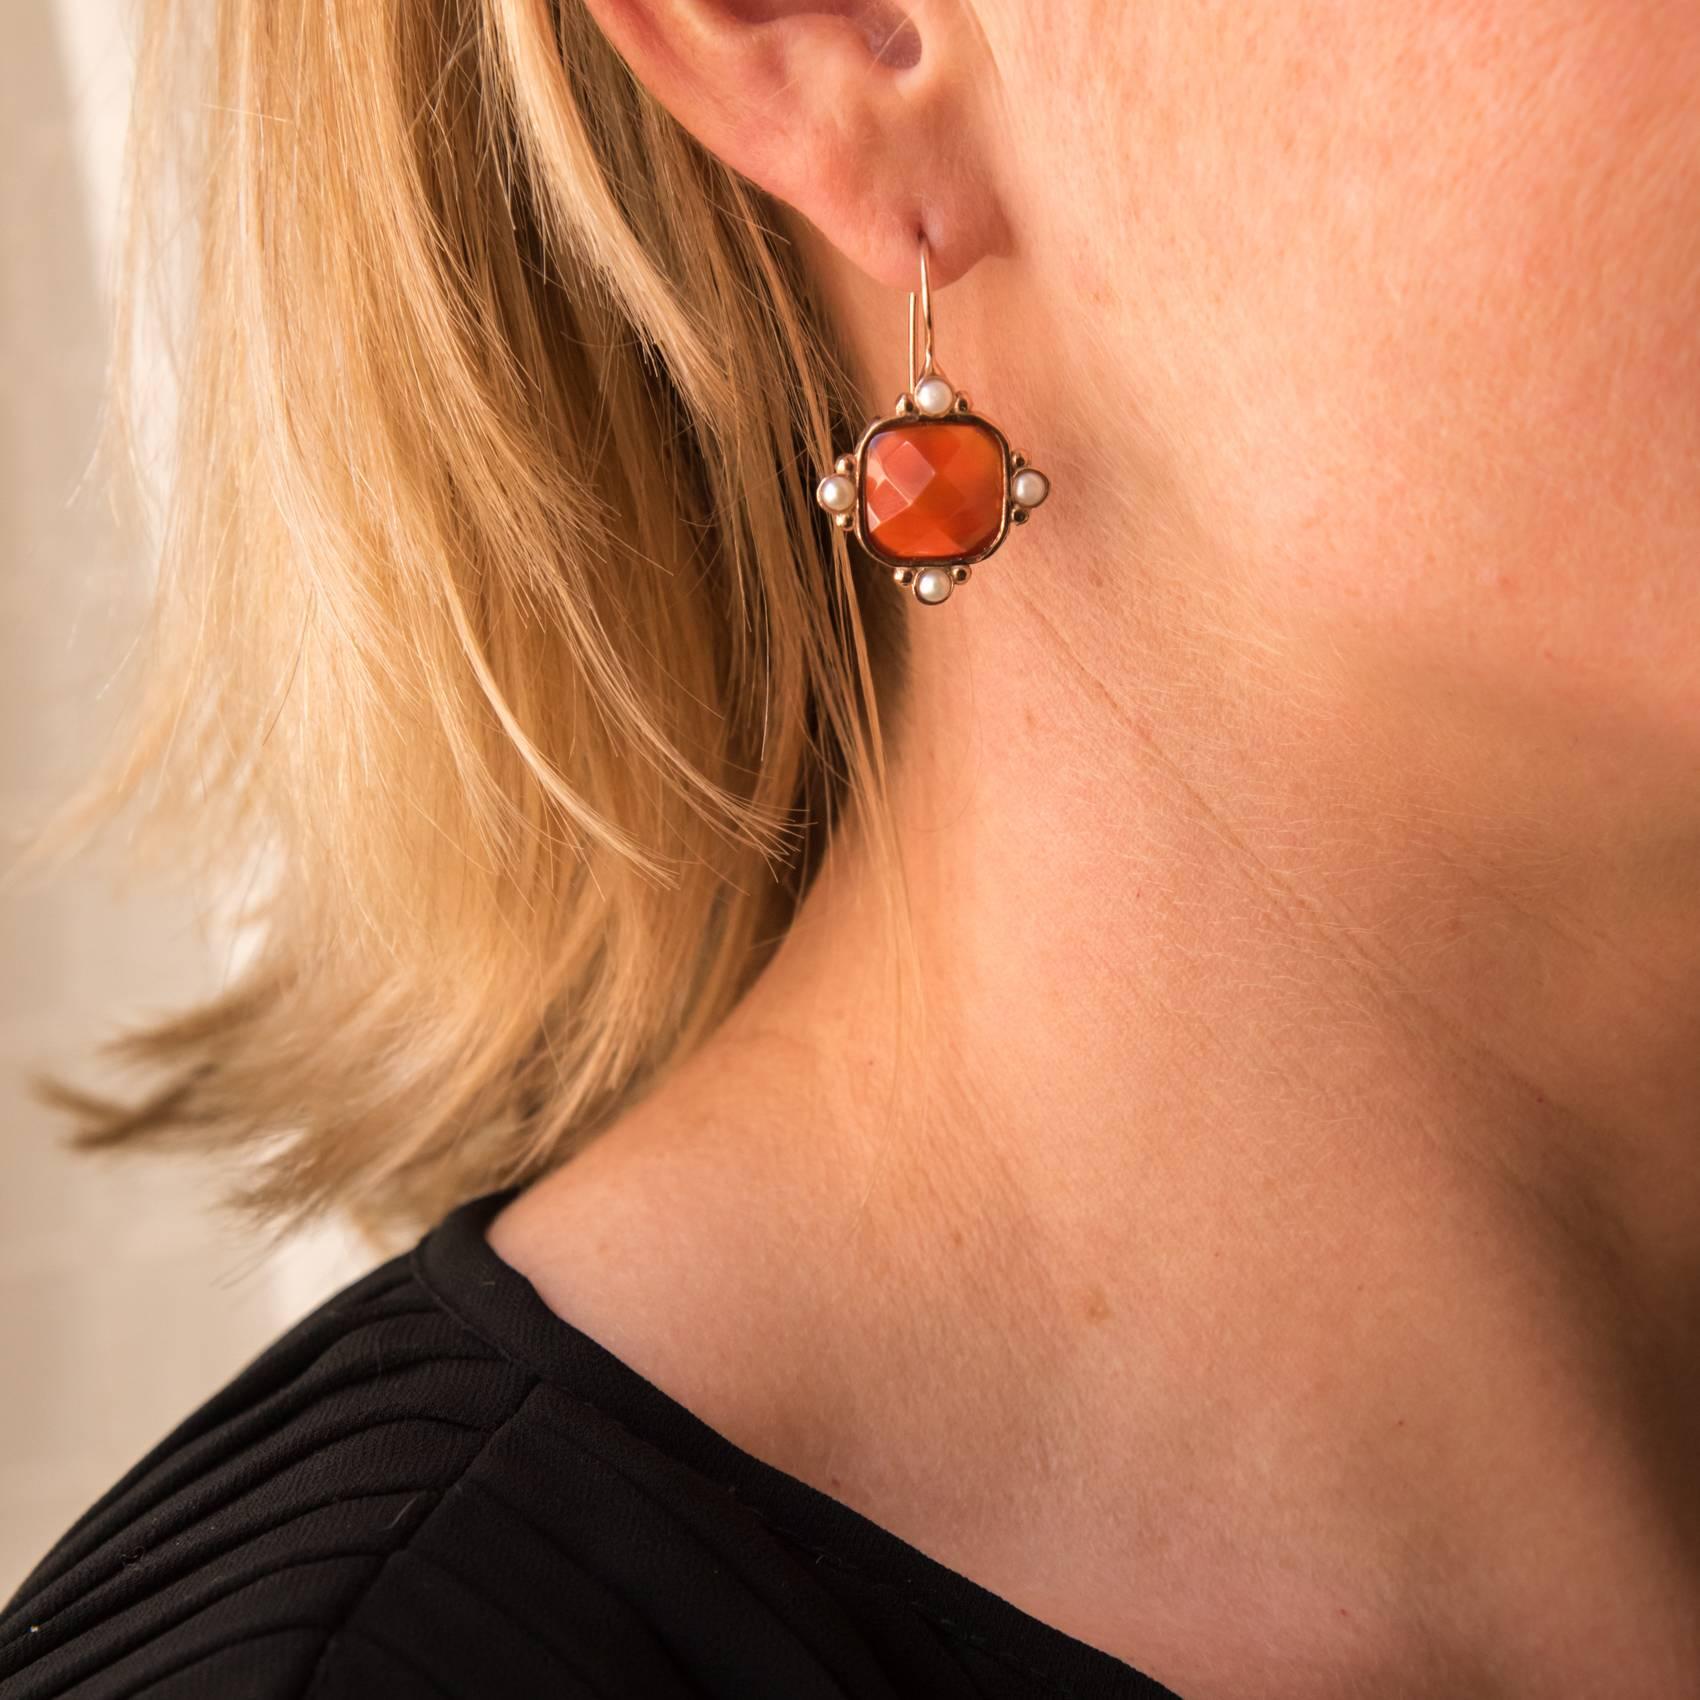 For pierced ears.
Earrings in vermeil, silver and rose gold.
Sleeper earrings, each is set with a faceted orange crystal surrounded by 4 white glass pearls closed set on both sides. The clasp is a gooseneck with safety hook.
Height: 3.2 cm, width: 2